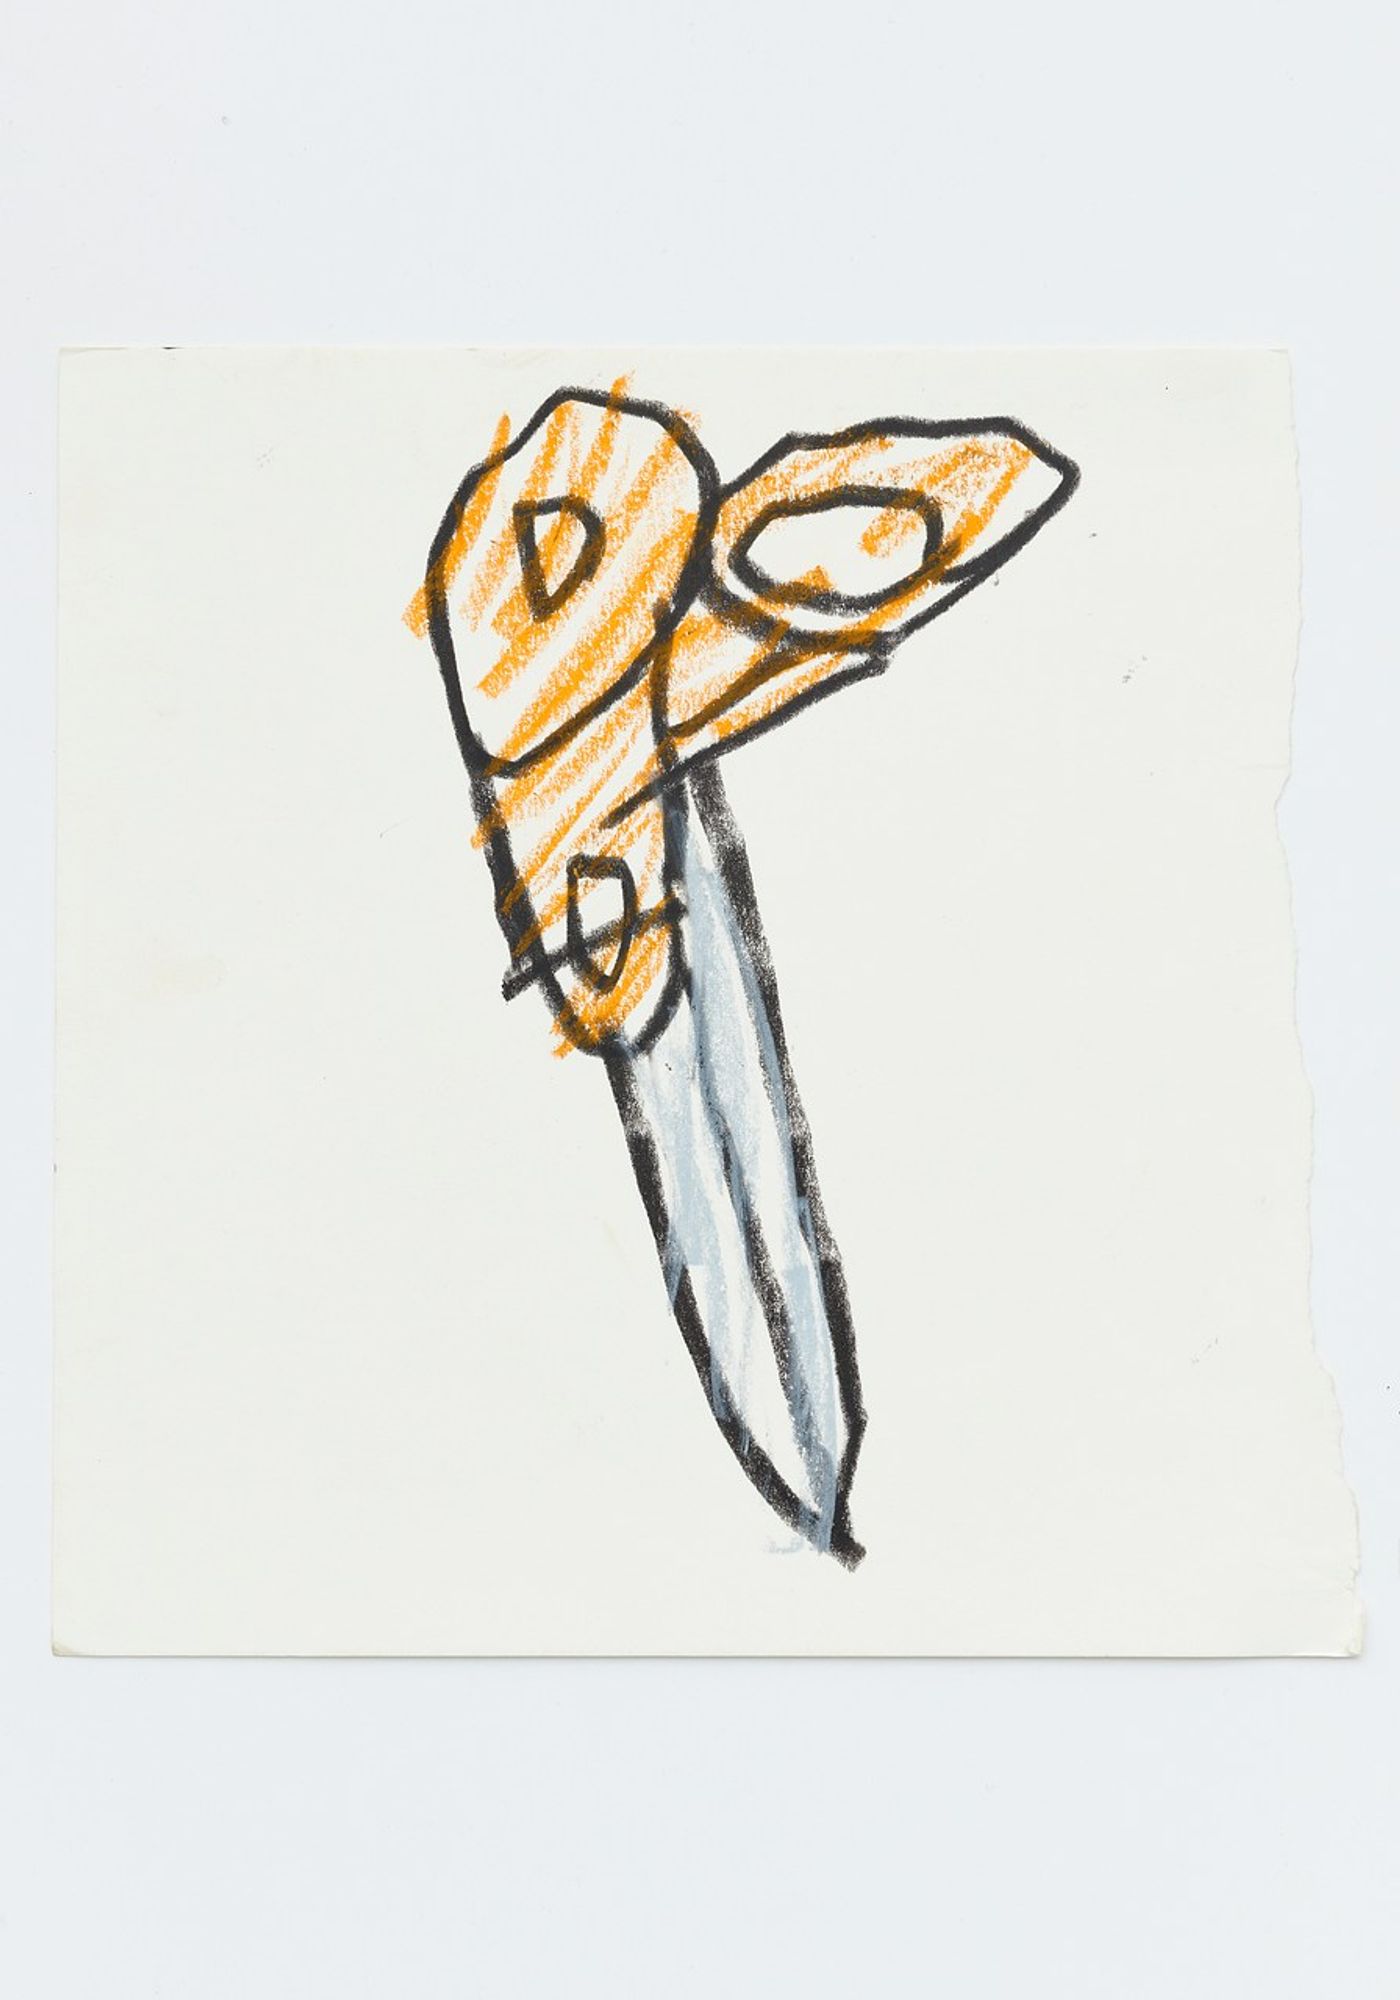 Image of Untitled (Scissors), 2021: Oil on pastel on paper